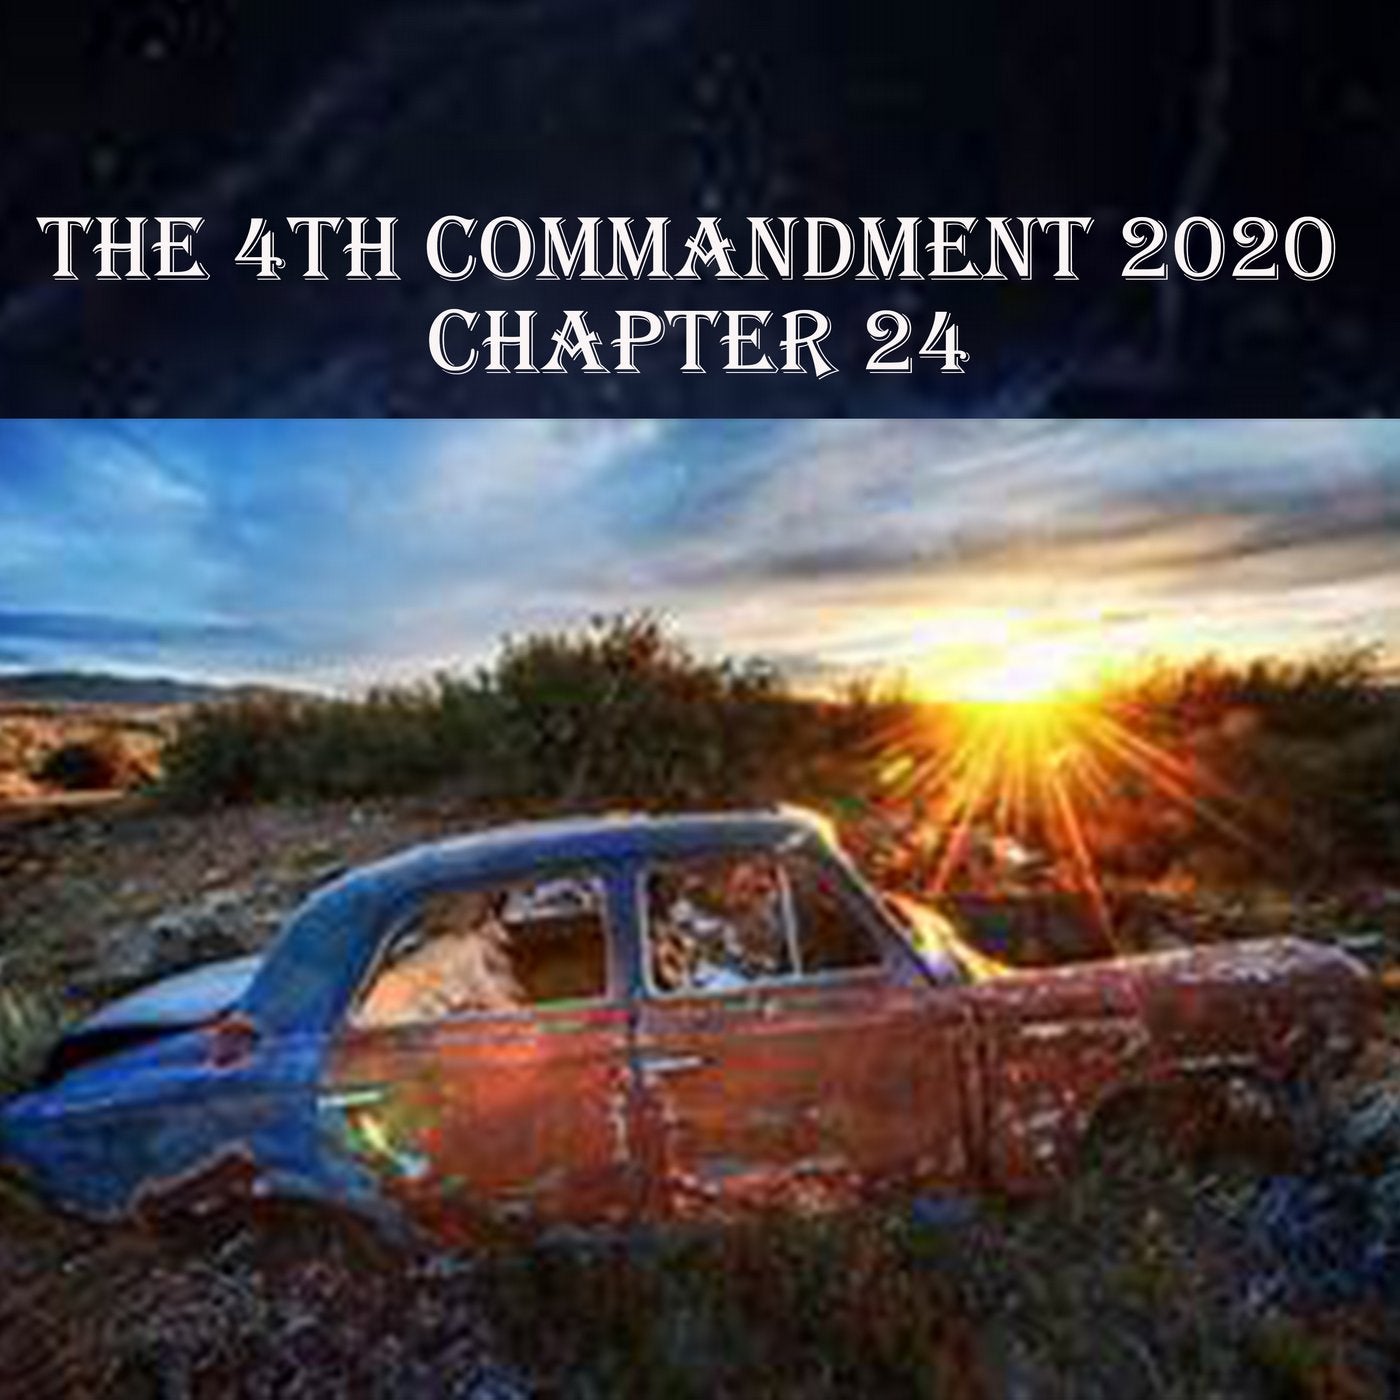 The 4th Commandment 2020 Chapter 24